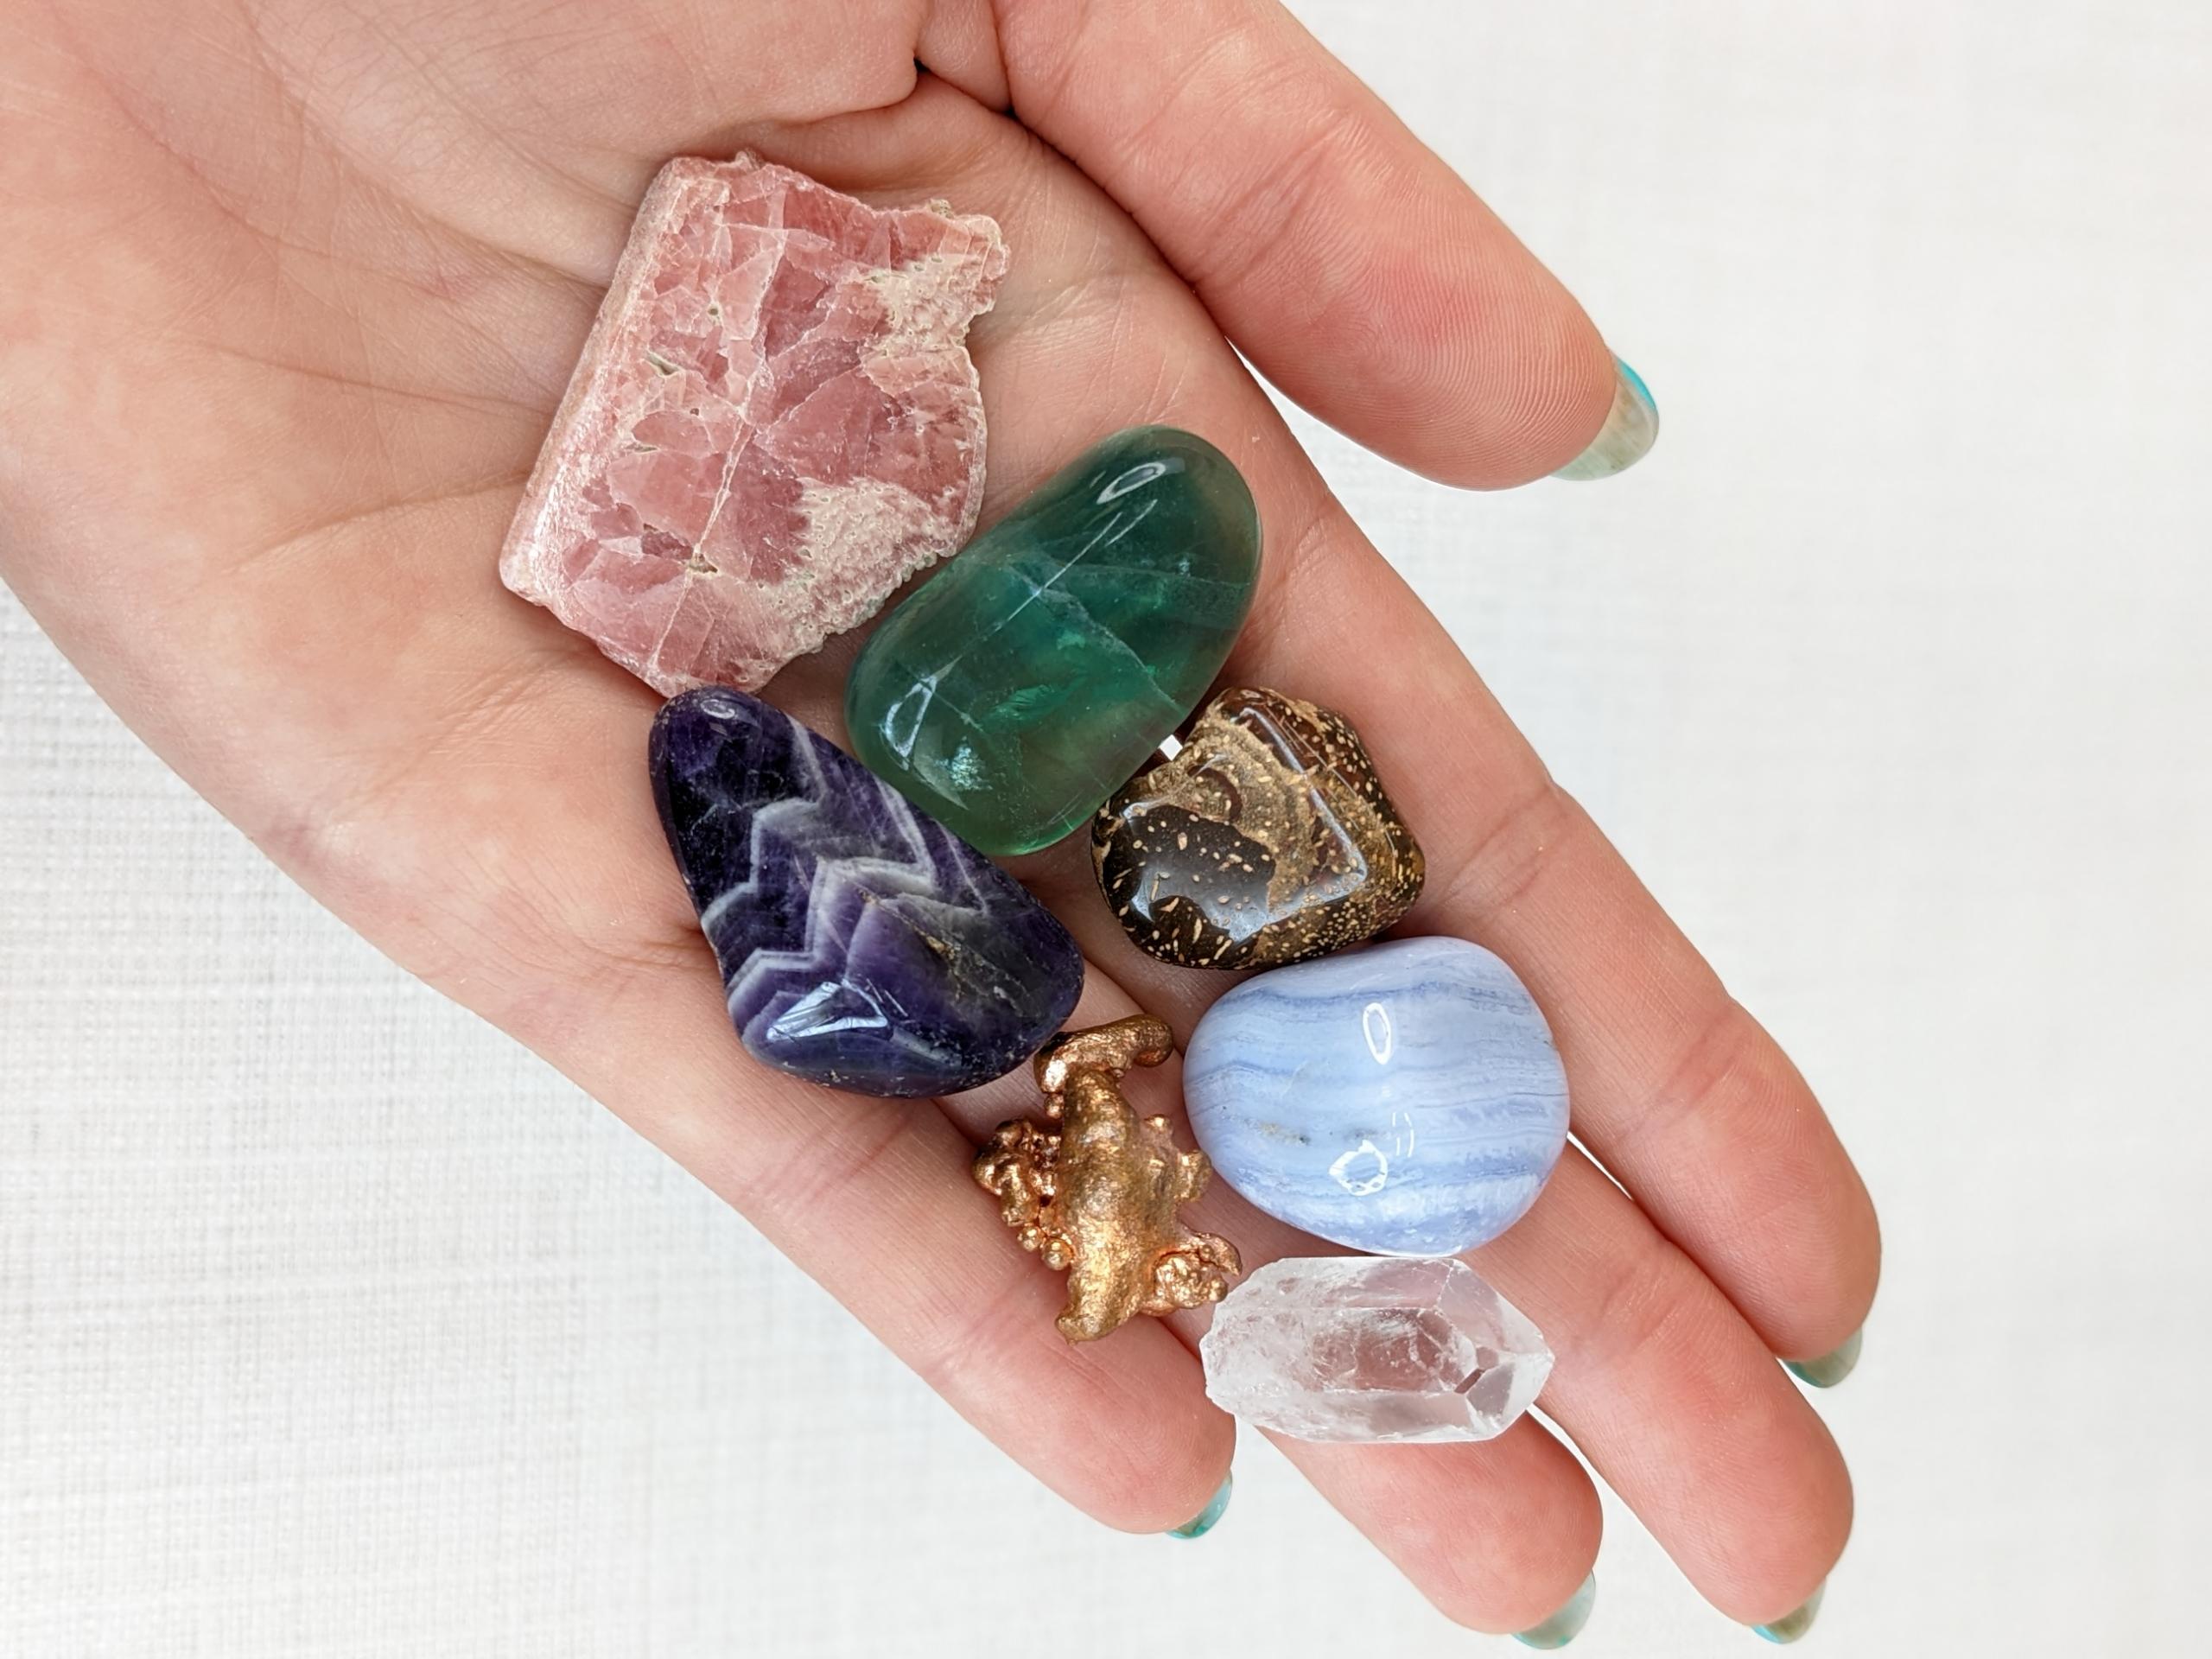 Visit Best Online US Crystal Store For Hand-Picked Amethyst & Quartz Crystals